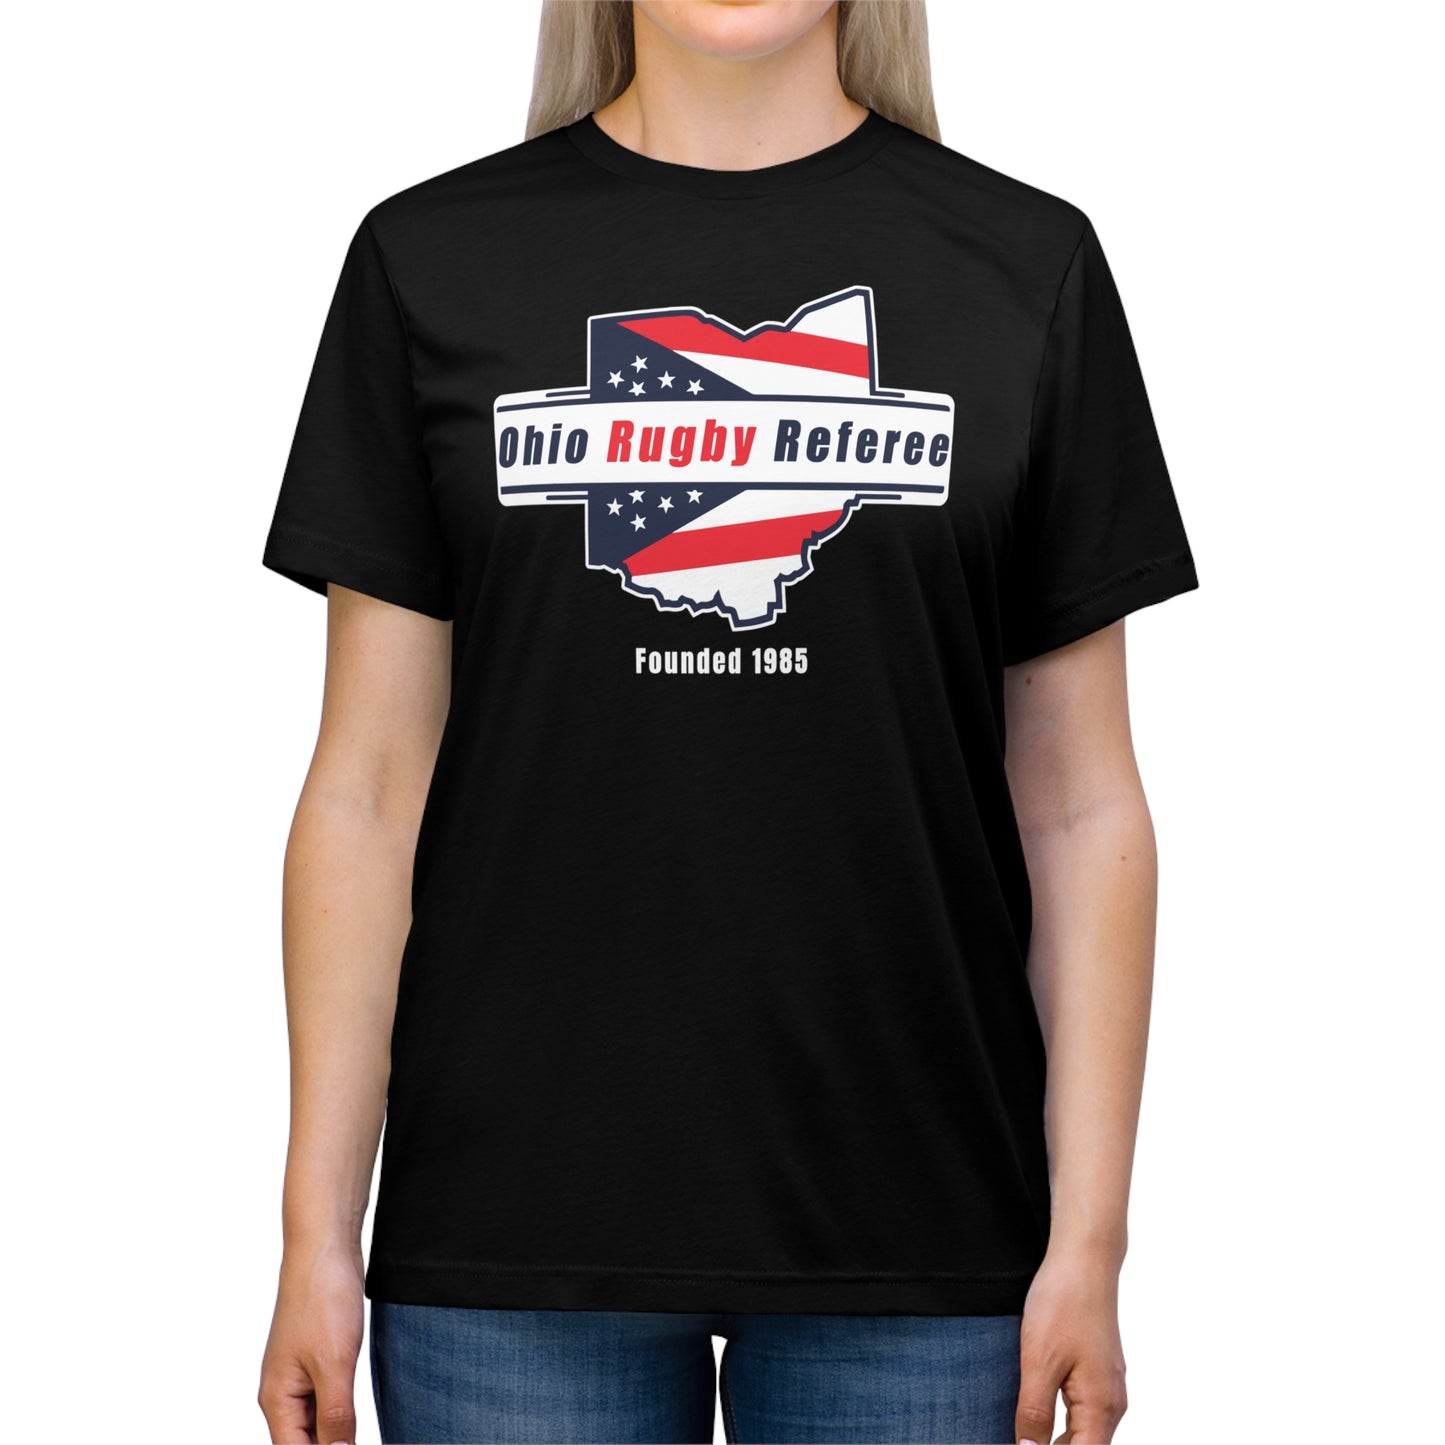 Unisex UltraSoft Triblend Tee | Ohio Rugby Referee Society